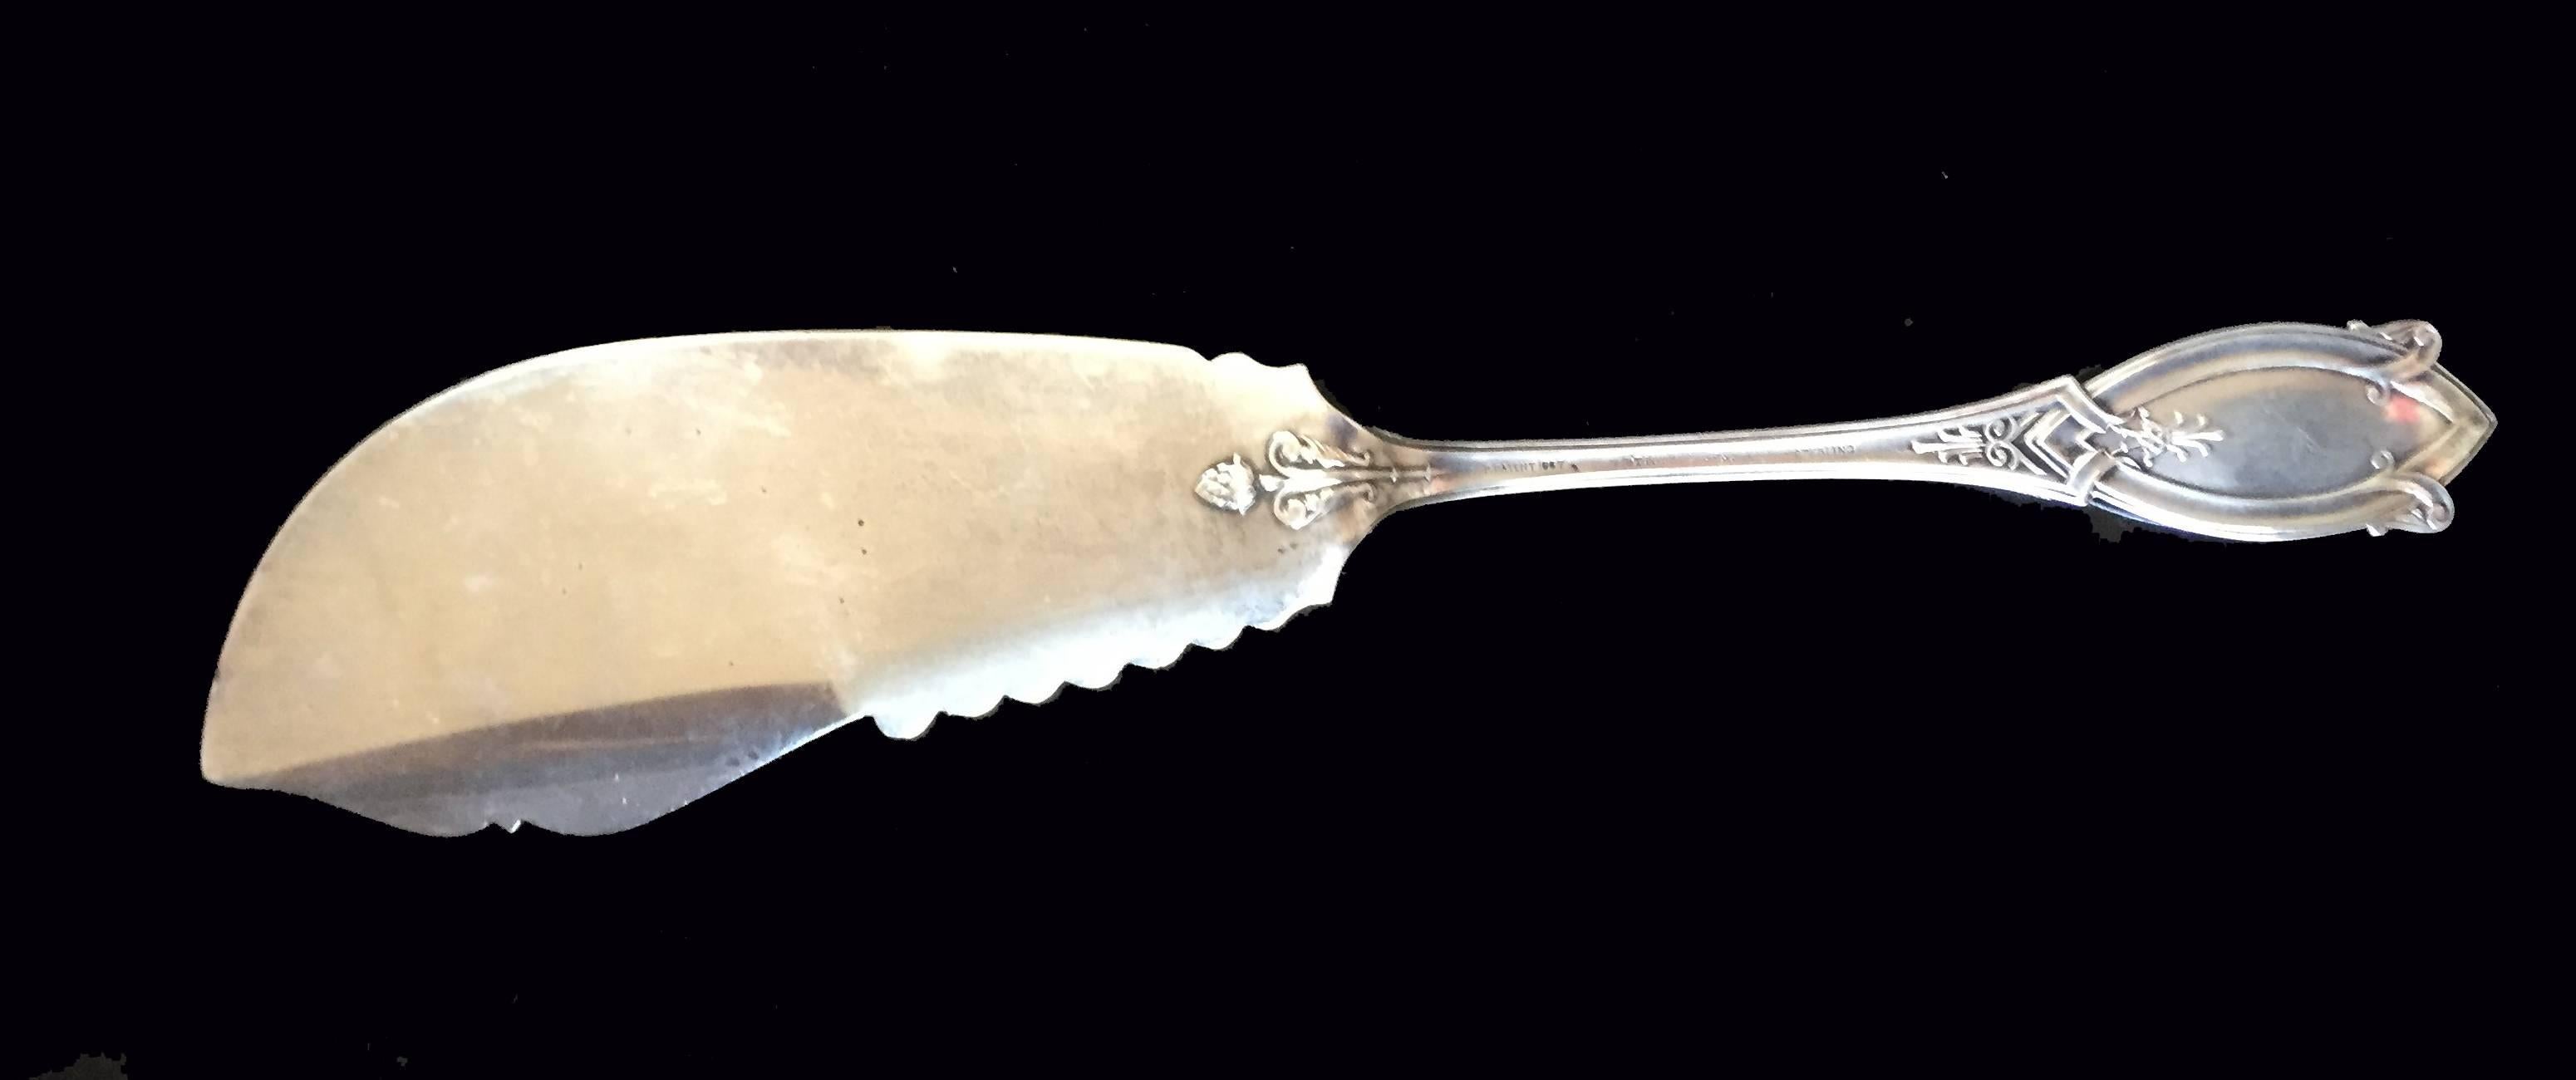 Victorian American Tiffany & Co. Sterling Silver Cake Slice, 1870s. The pattern is like a stylized version of Italianate, with bas-relief strawberry at the transition point where the server meets the handle. Engraved on the slice with Italianate